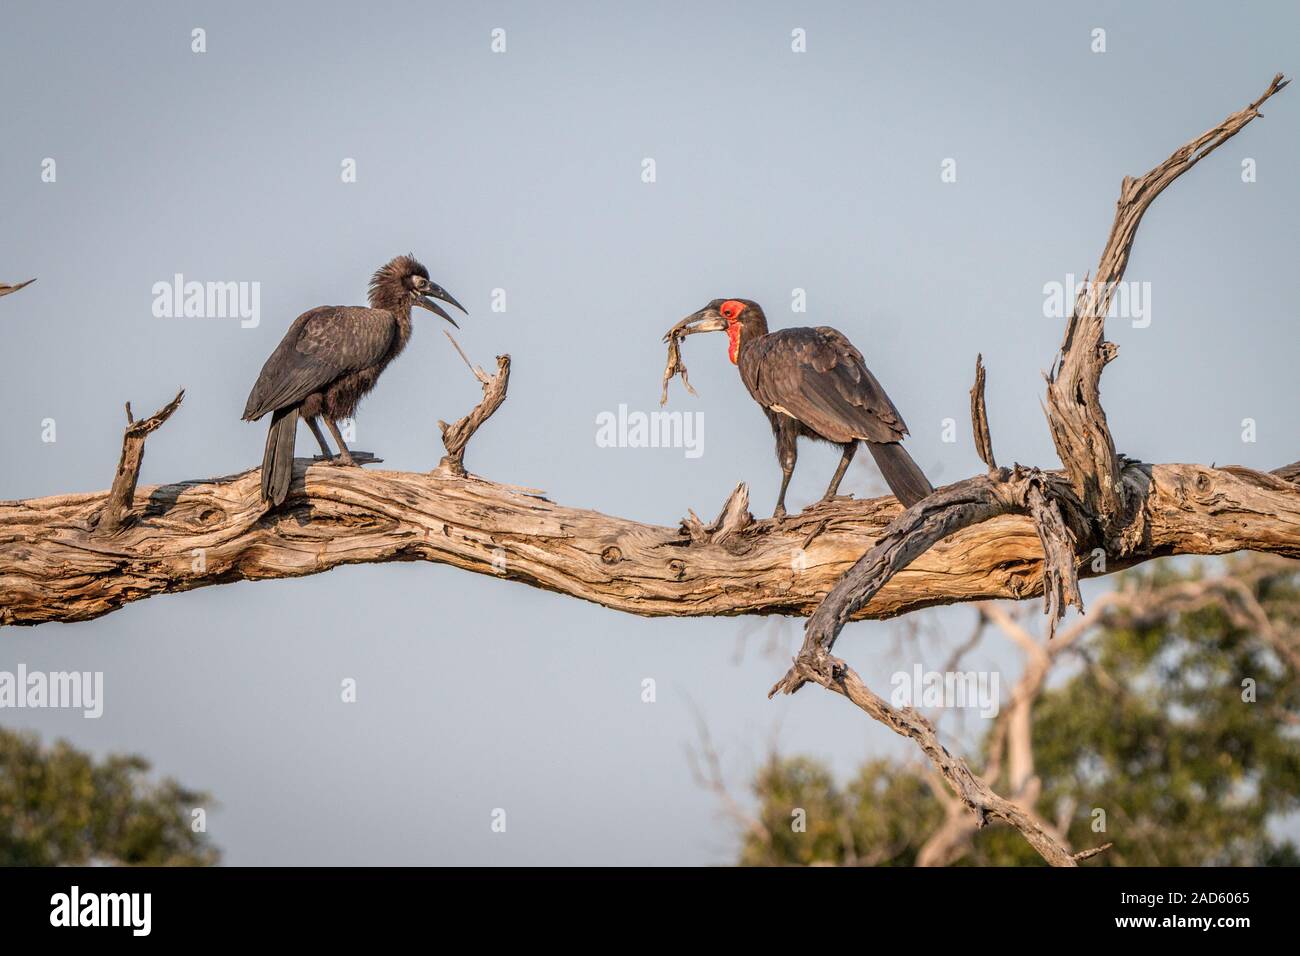 Two Southern ground hornbills on the branch. Stock Photo